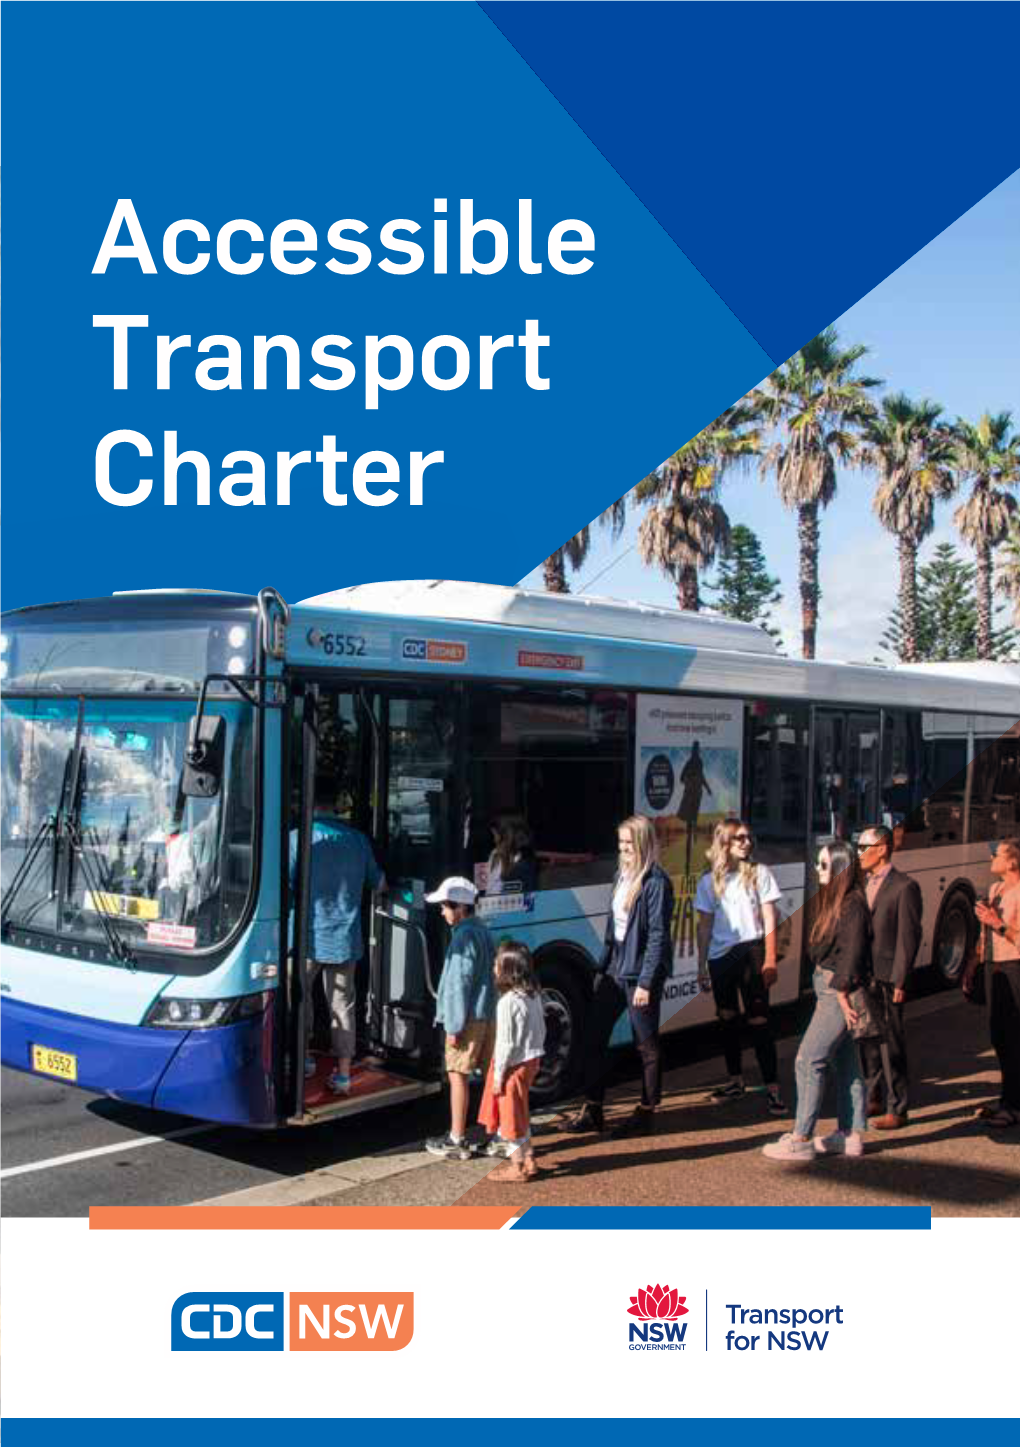 Accessible Transport Charter Our Transport Access Mission at CDC We Believe That Accessible Public Transport Is Integral to People’S Lives